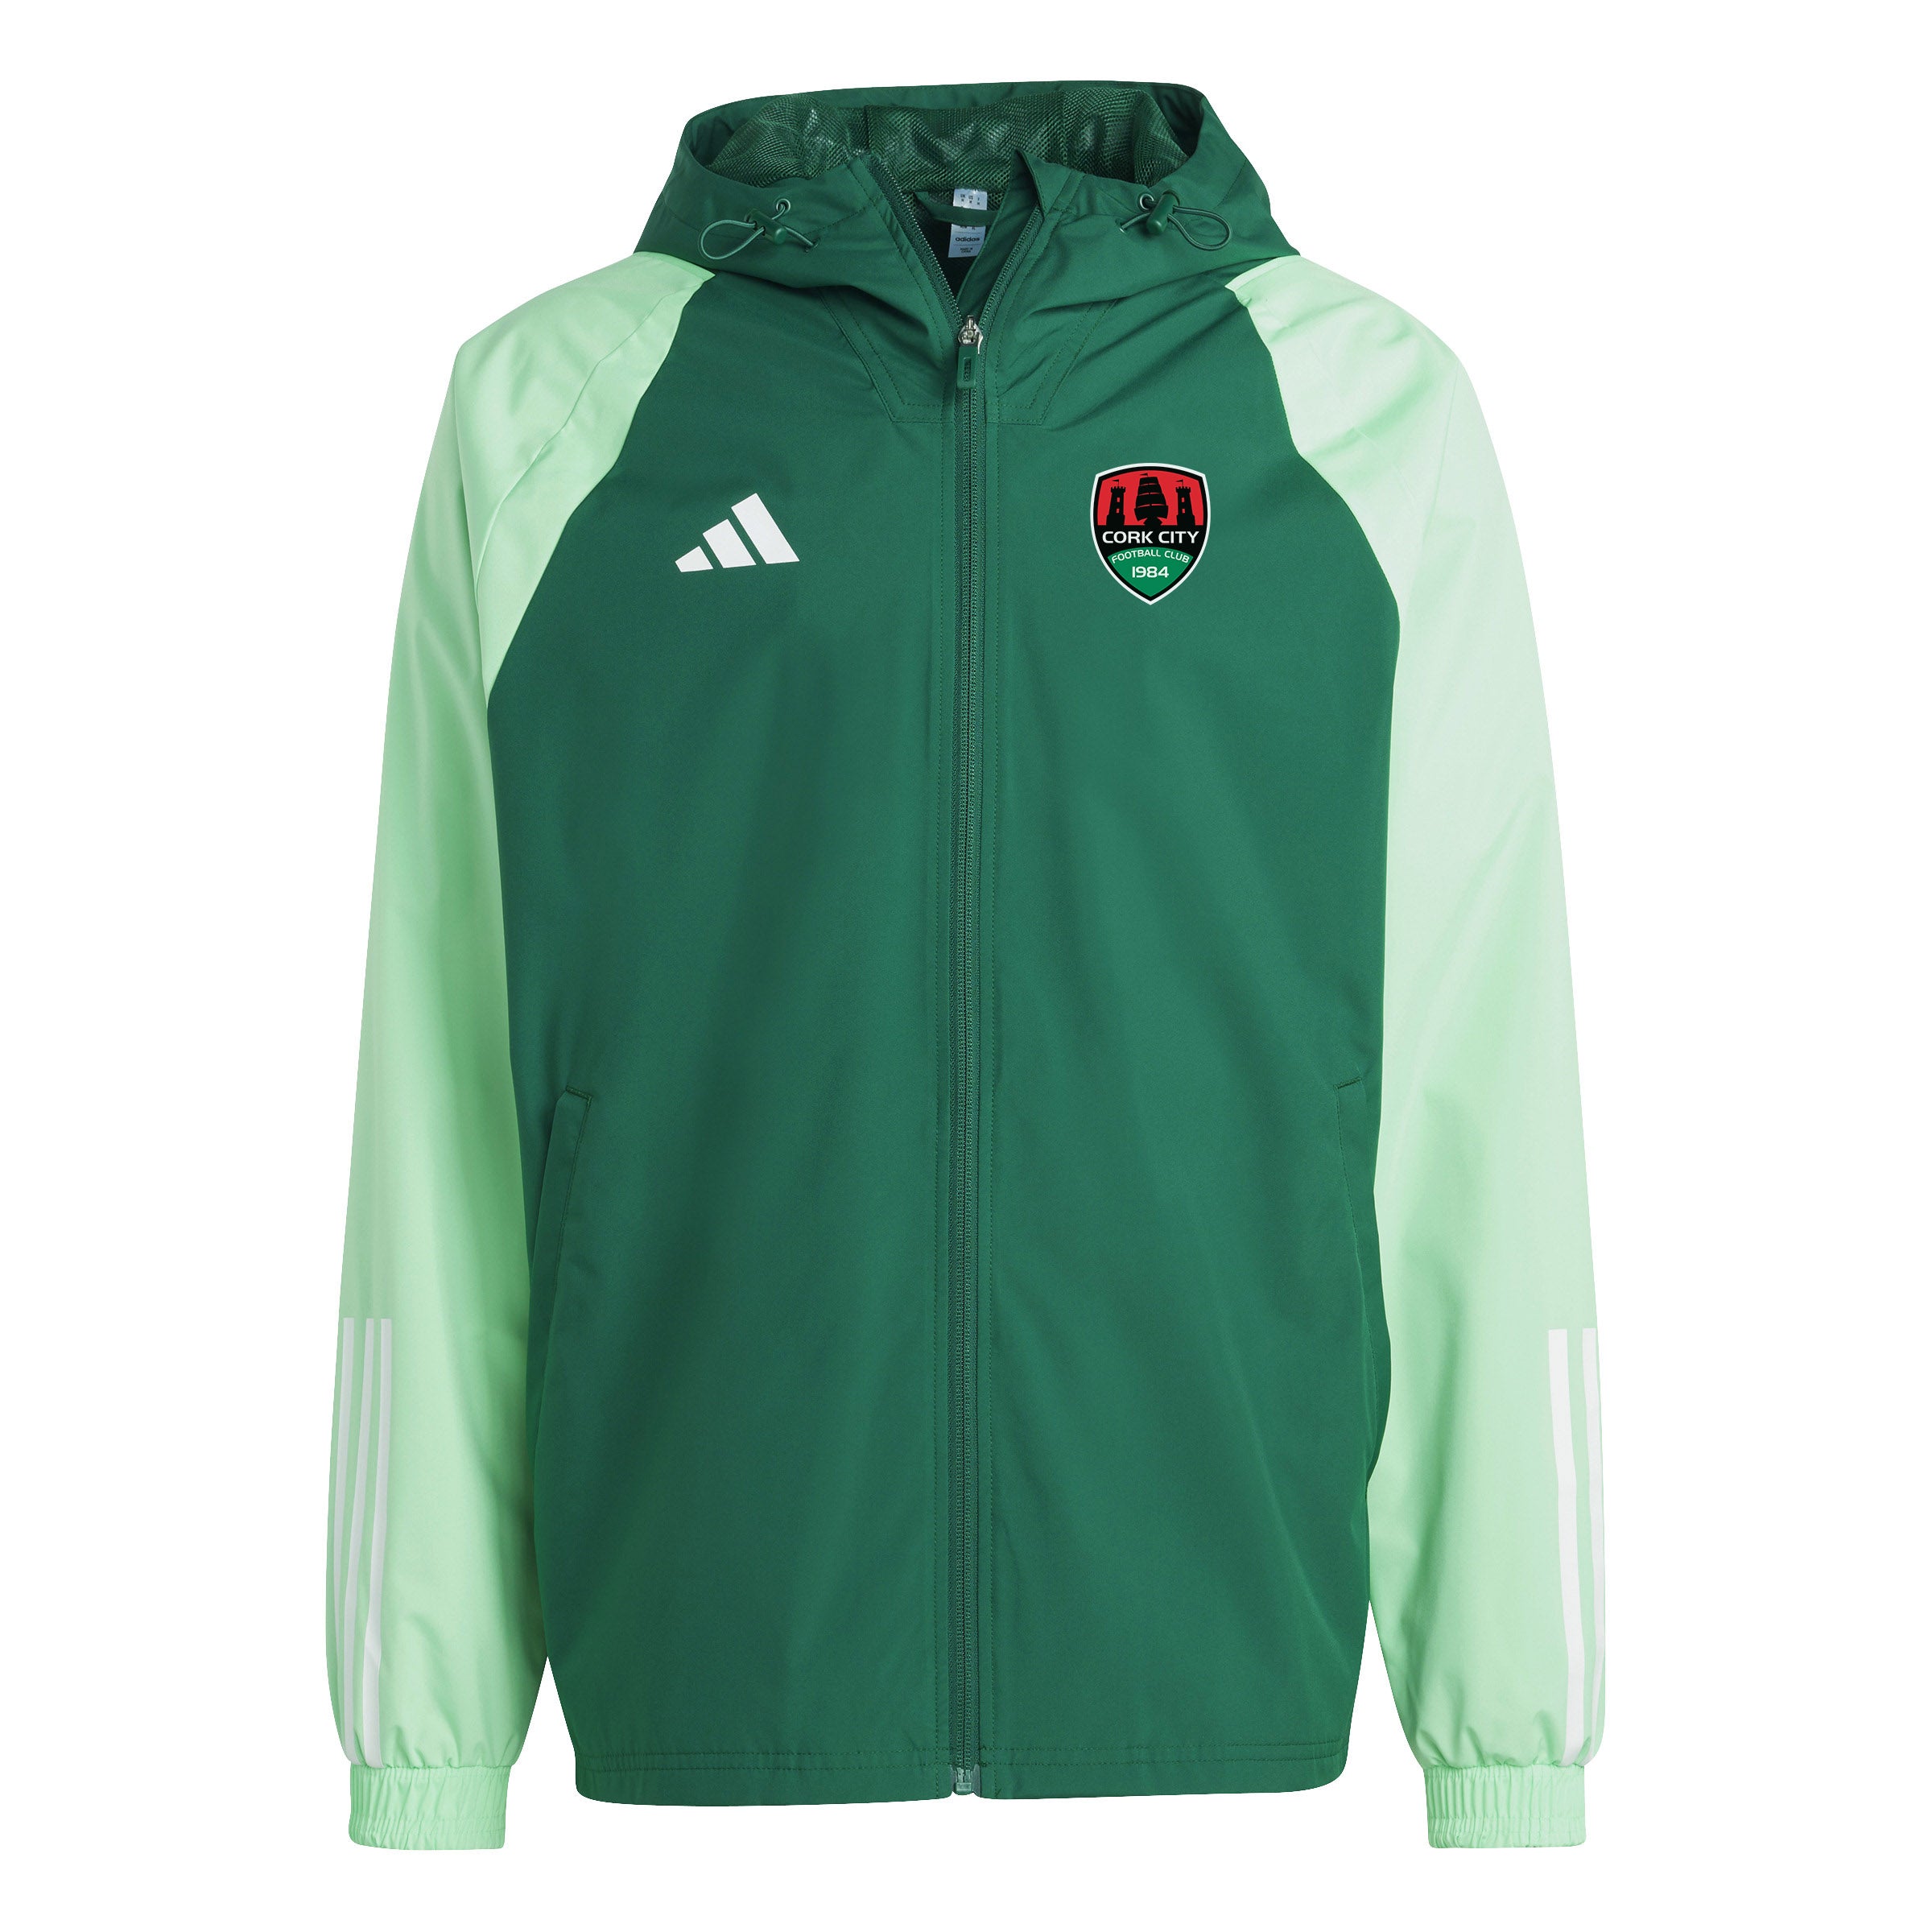 2024 Players All-Weather Jacket - Green 2 Tone